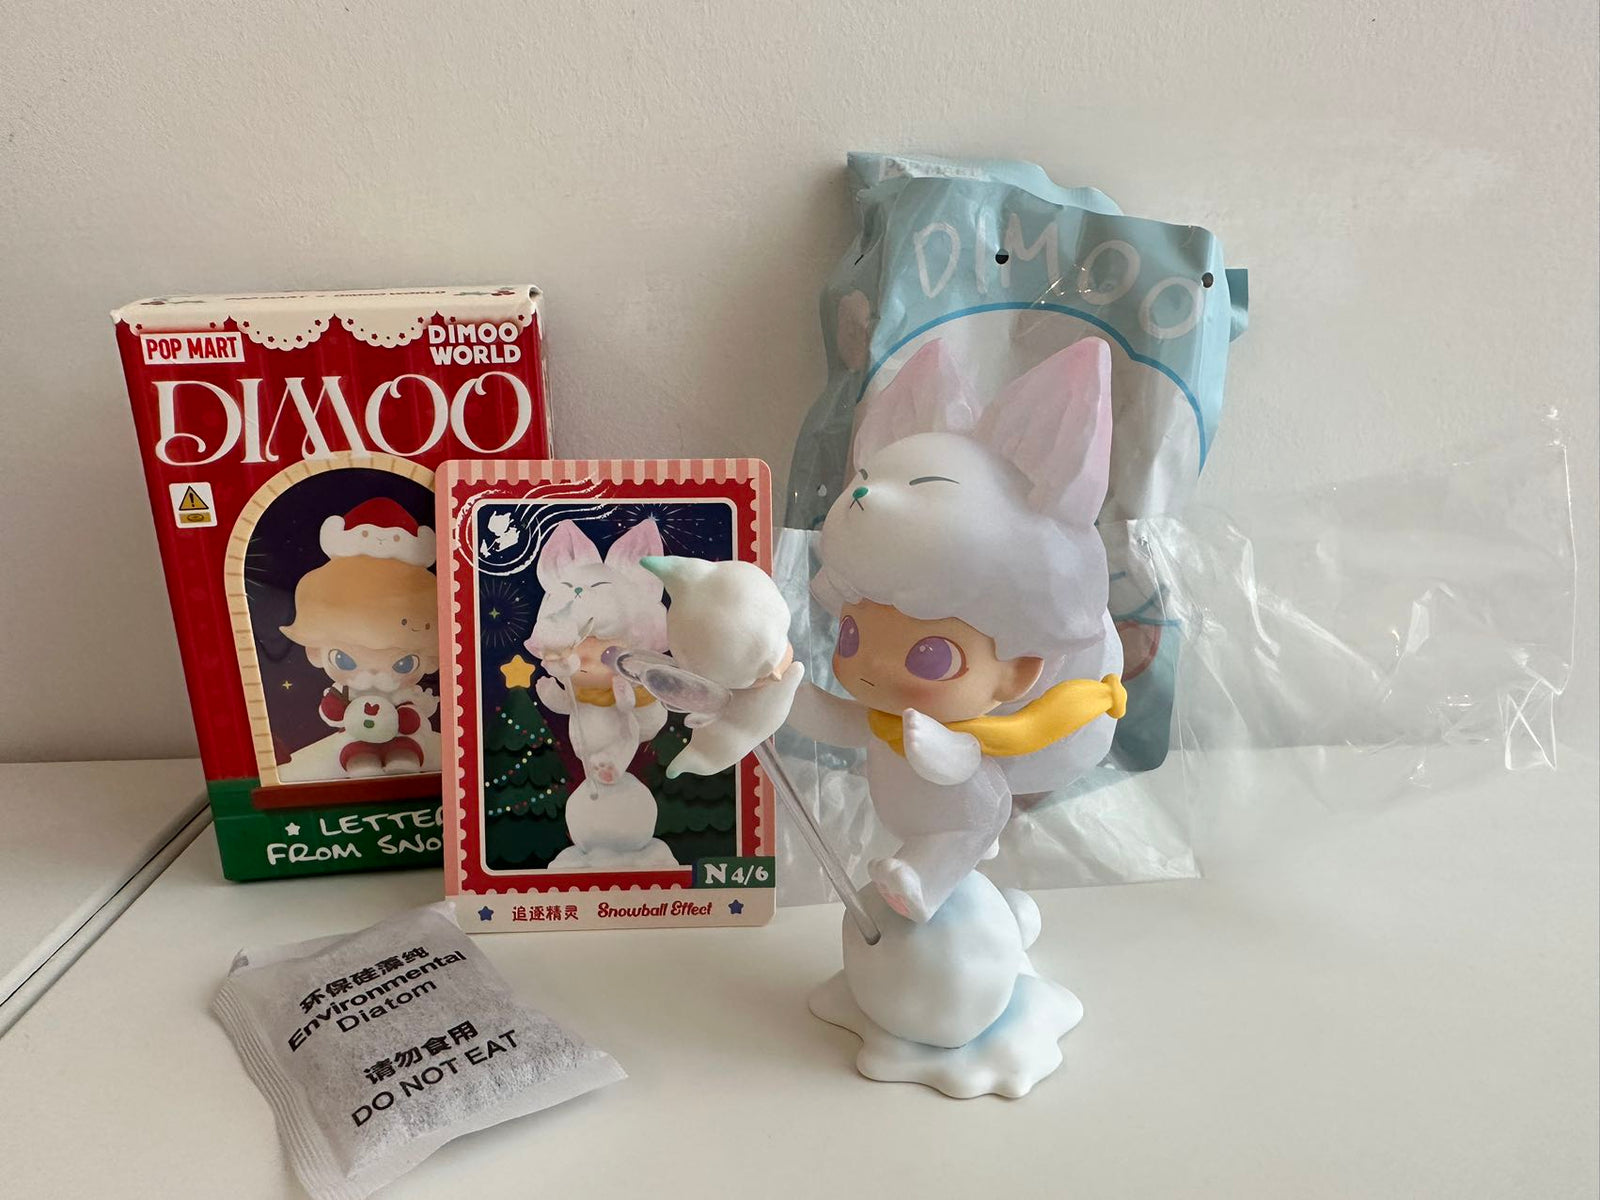 Snowball Effect - DIMOO Letters from Snowman Series Figures - 1